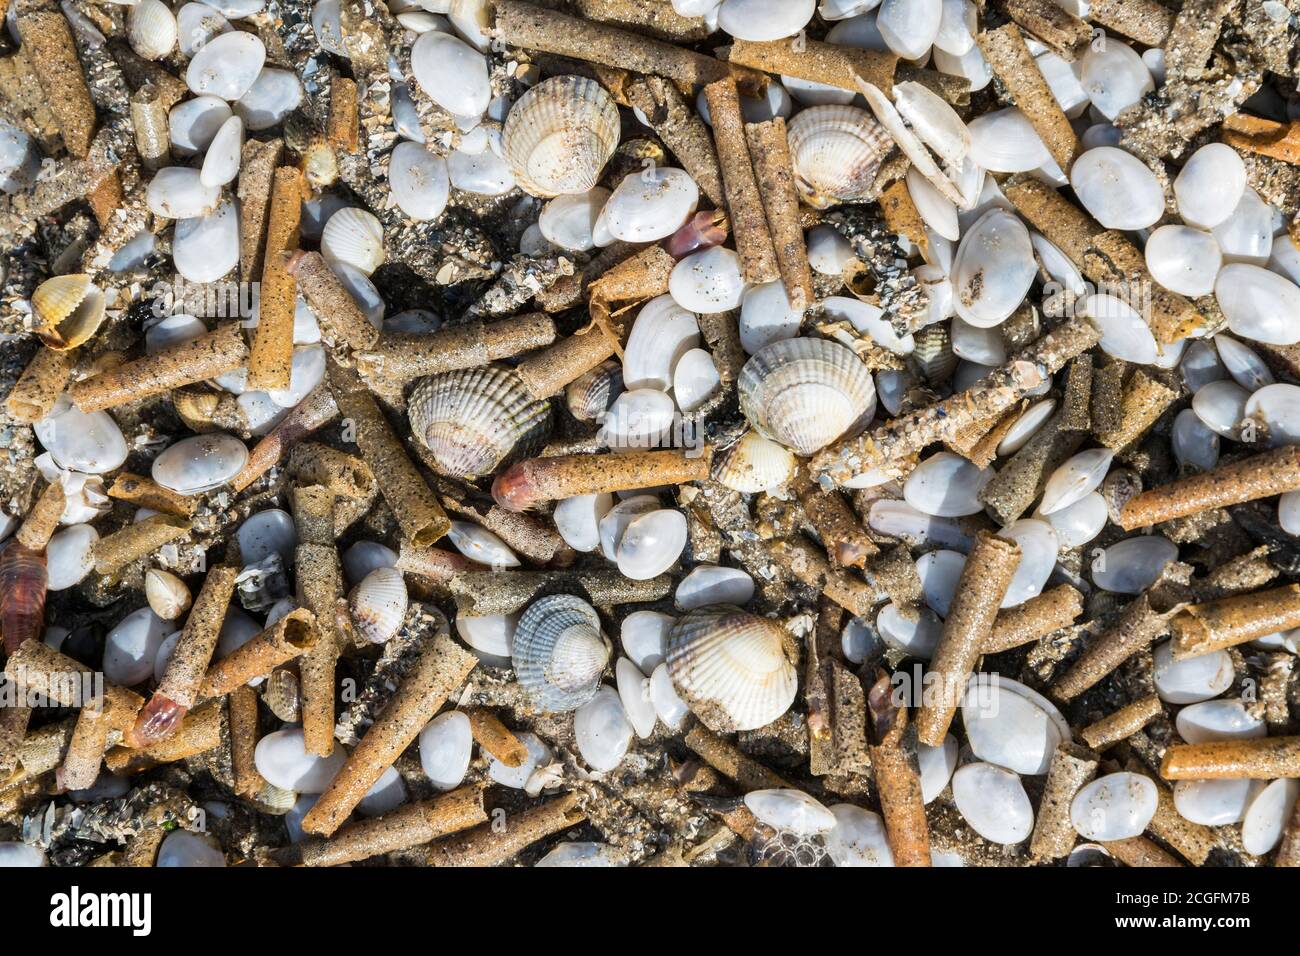 Various sea shells and worm tubes washed up on a North Wales beach after a storm Stock Photo